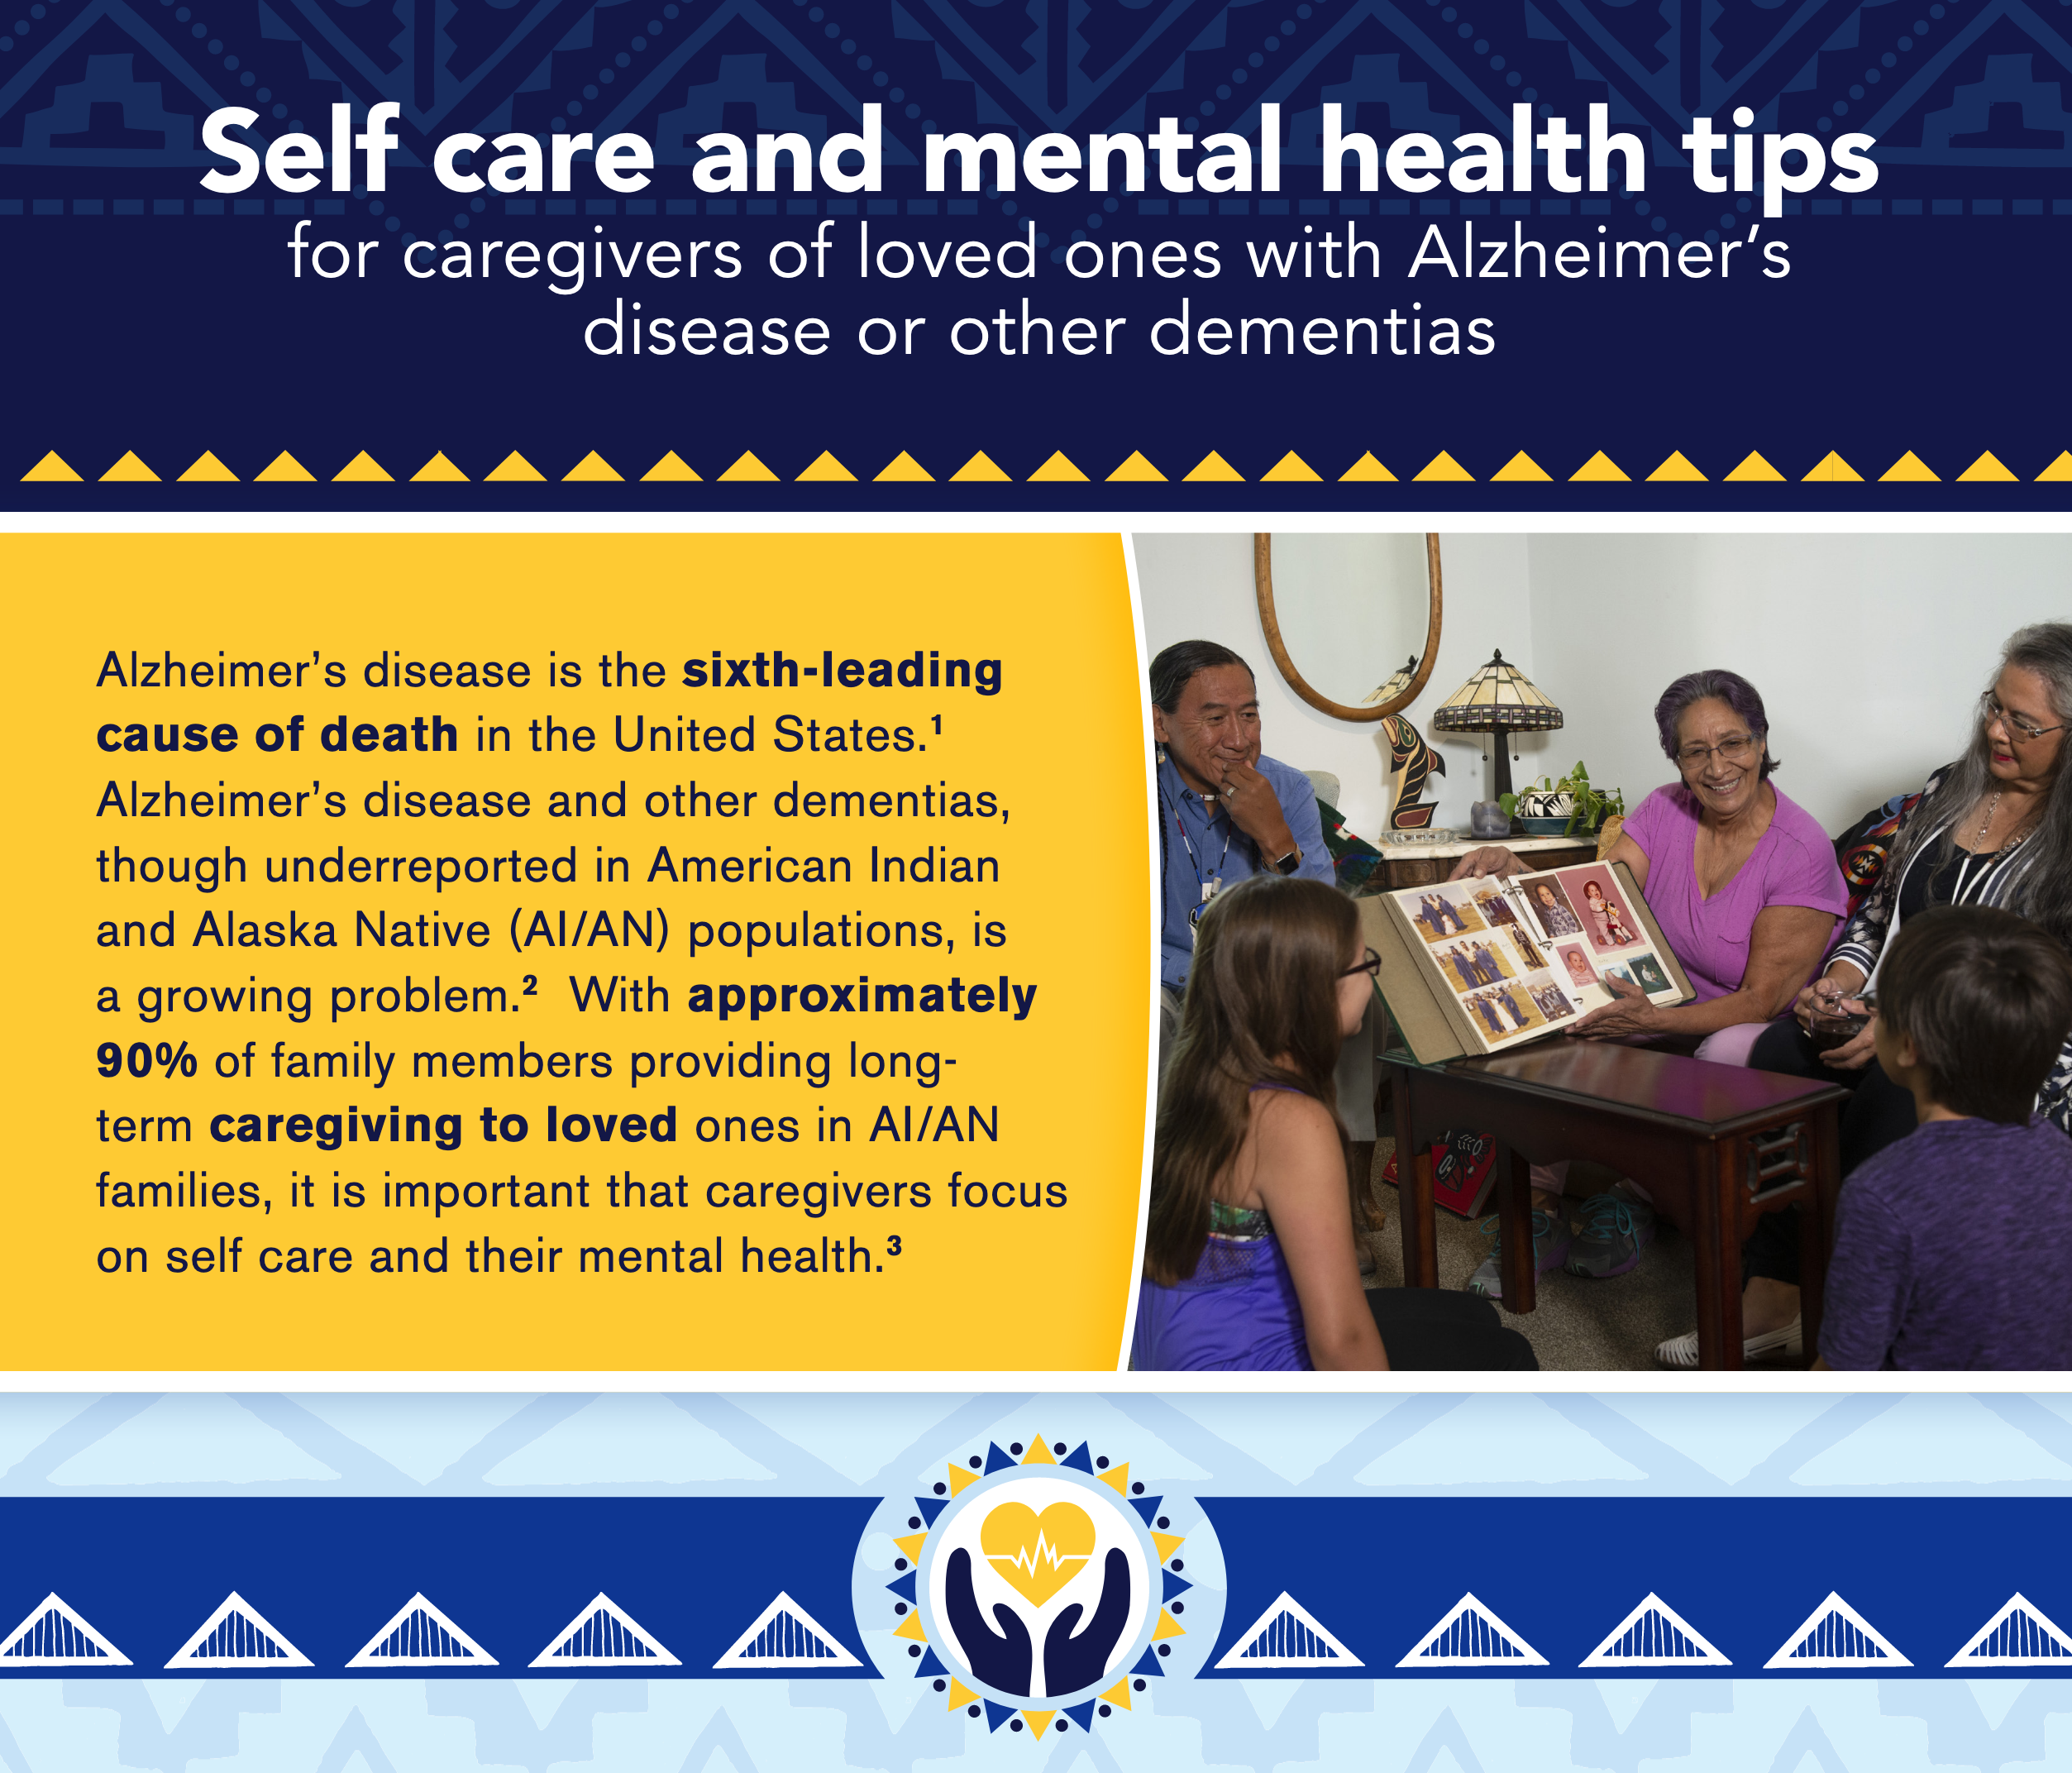 Self care and mental health tips for caregivers of loved one with Alzheimer's disease or other dementias